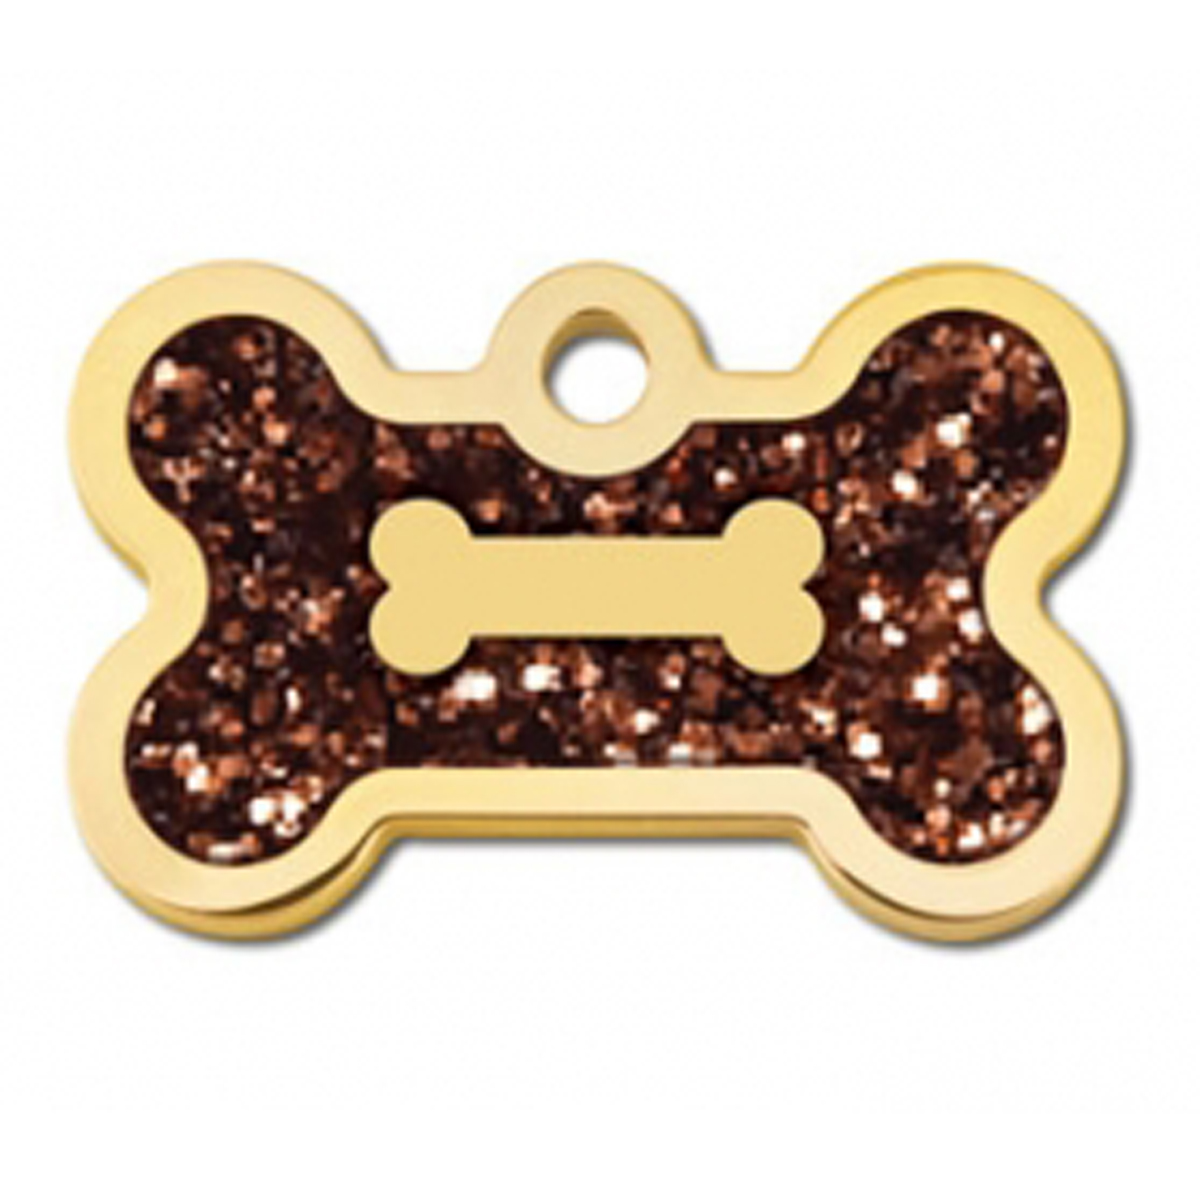 Bone Small Engravable Pet I.D. Tag - Gold and Bronze Glitter